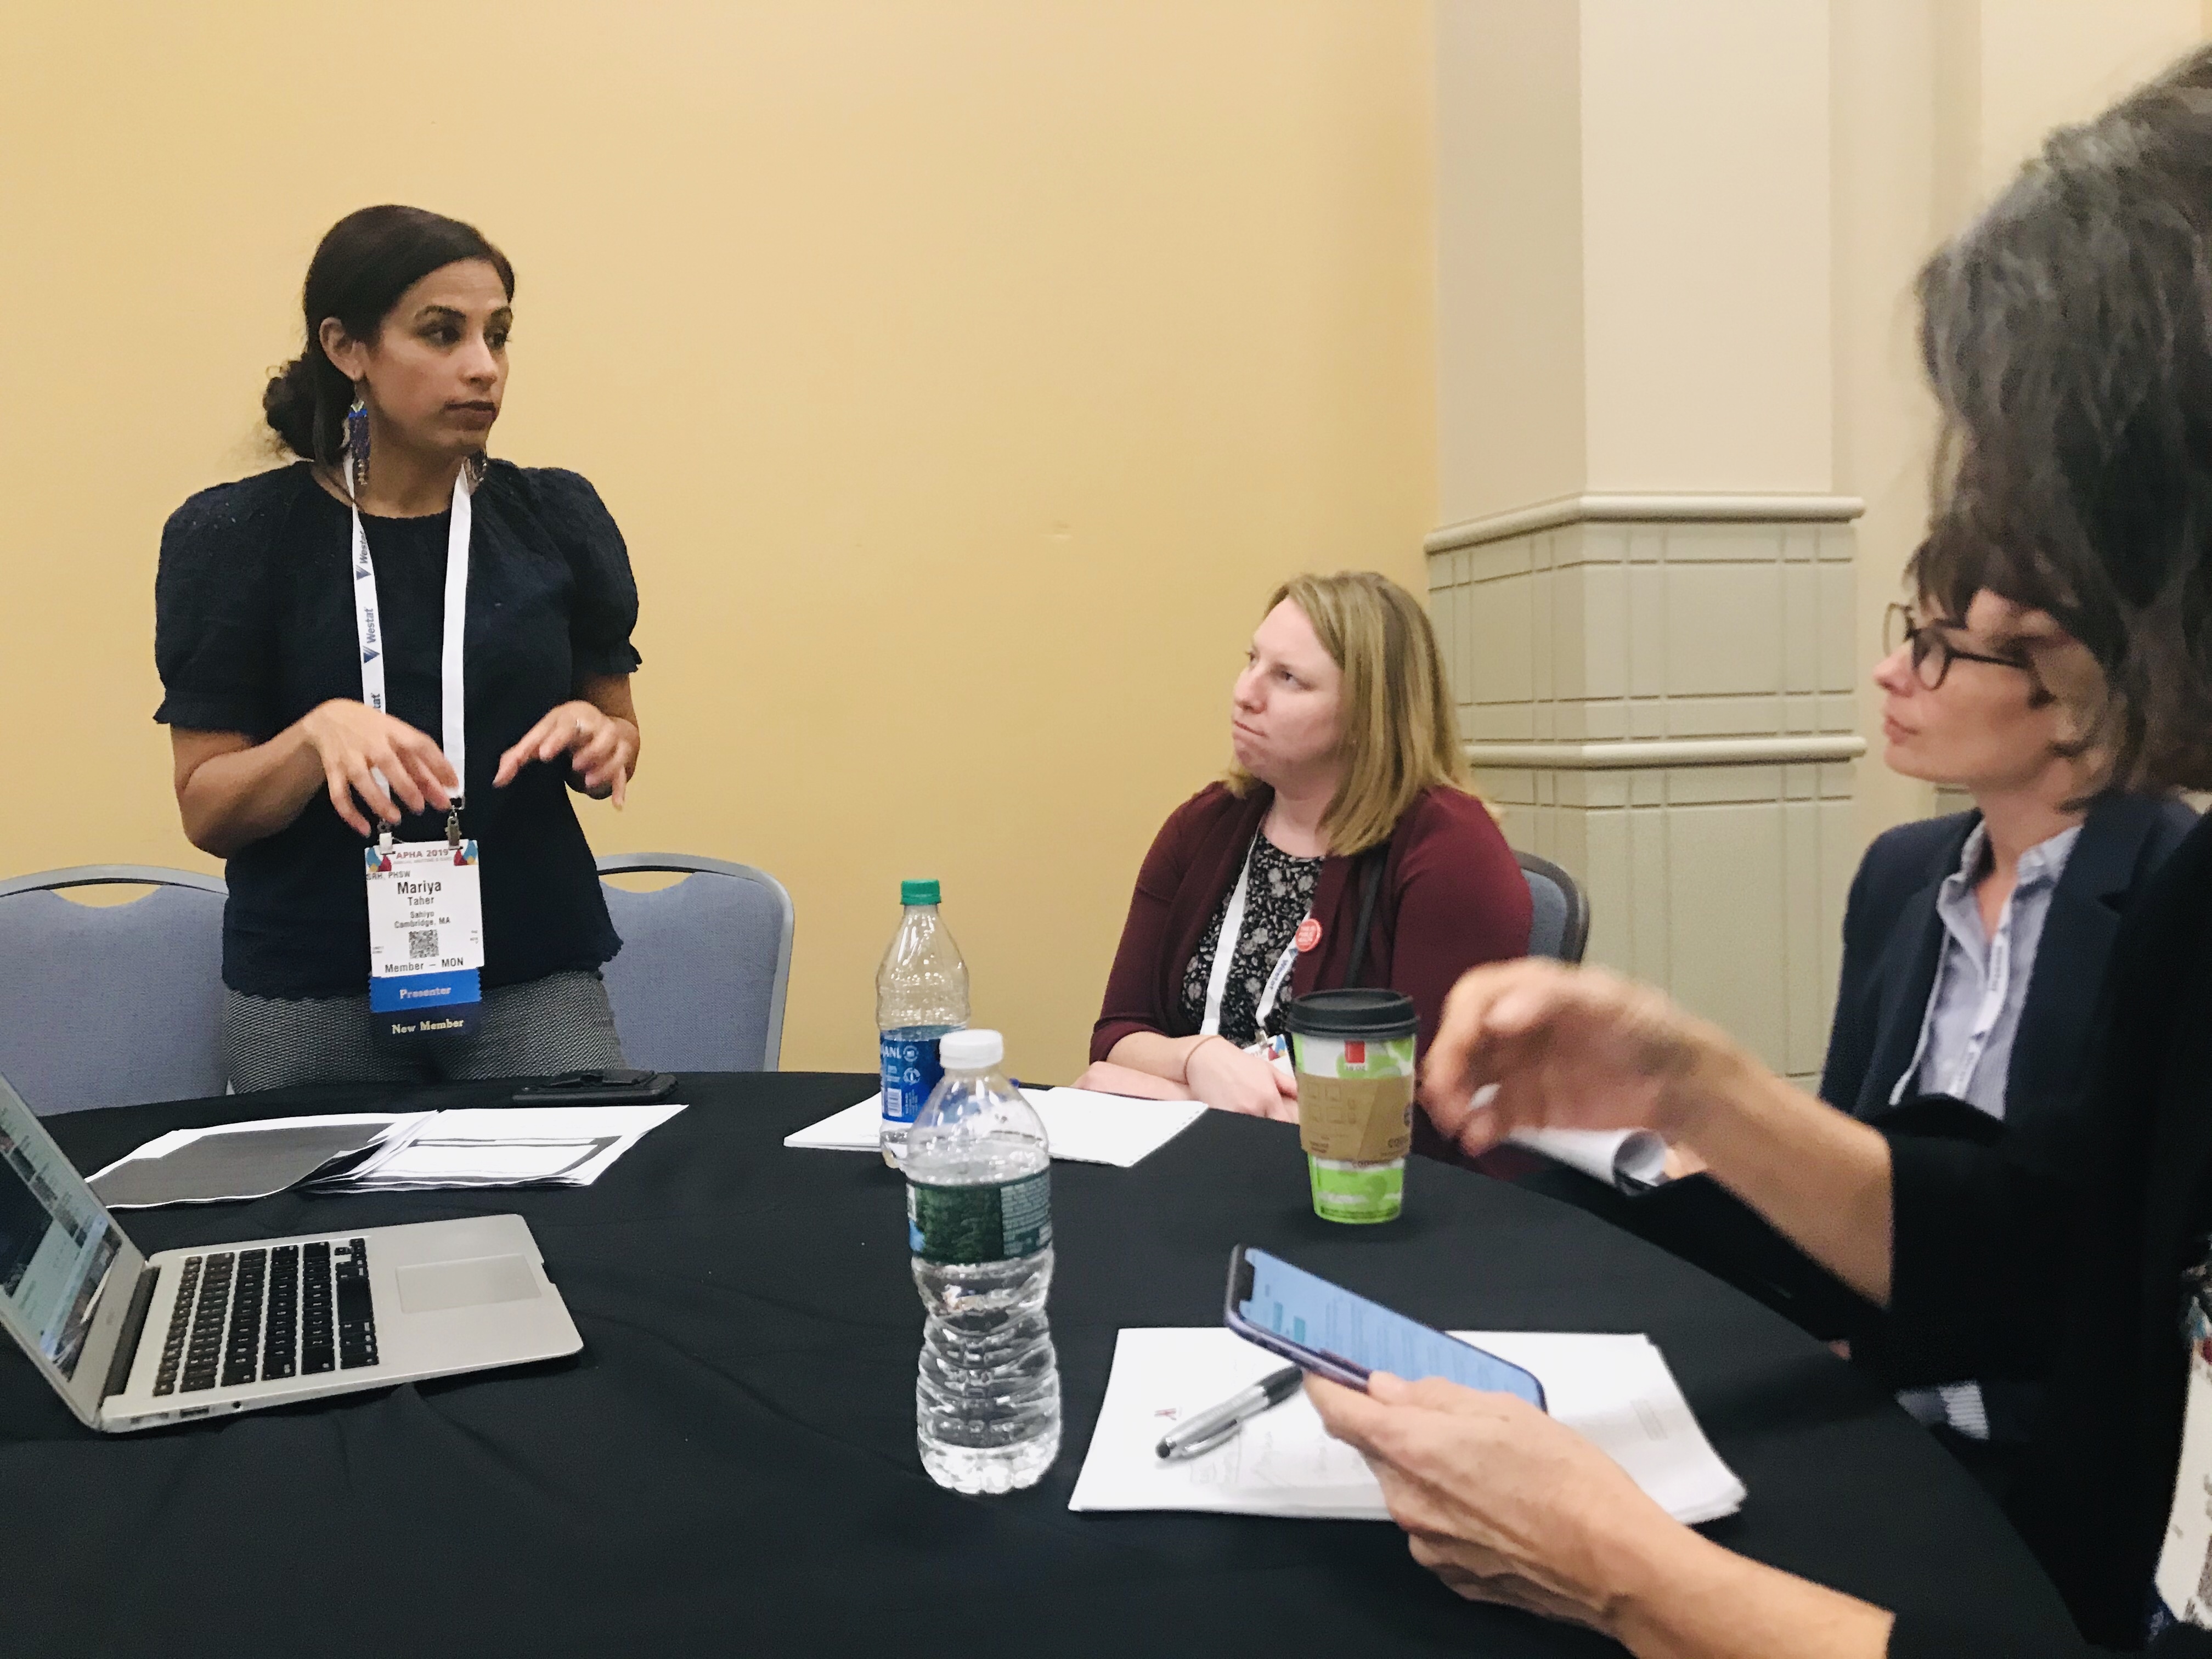 Utilizing Participatory Storytelling to Educate - A session at APHA 2019